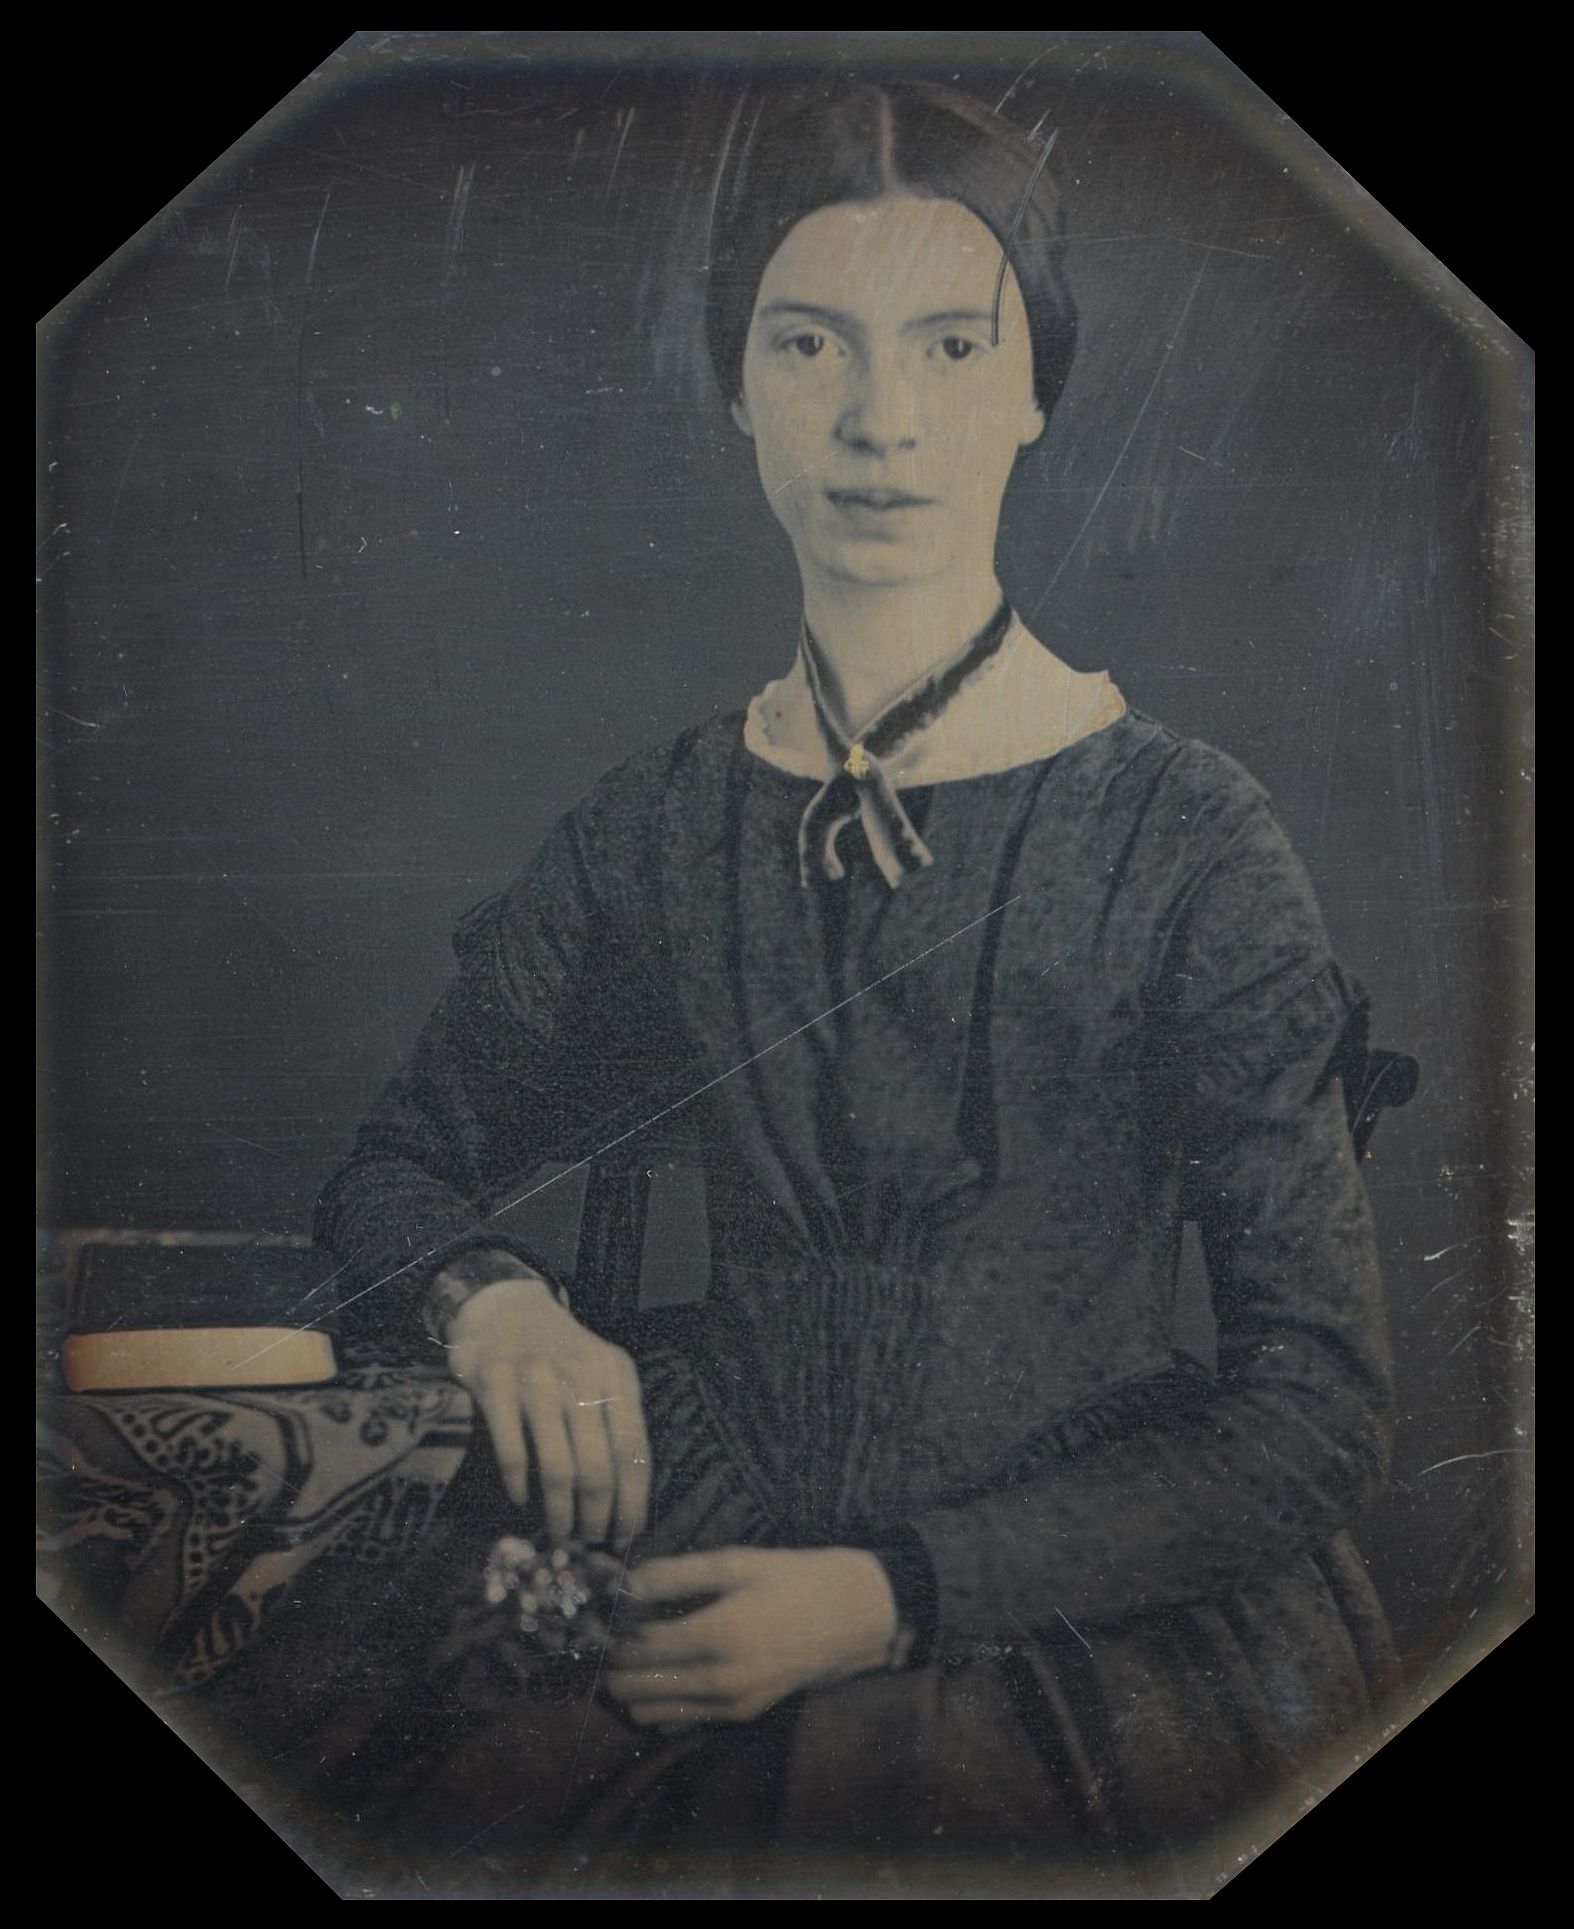 Black-white_photograph_of_Emily_Dickinson by Daguerreotype taken at Mount Holyoke, December 1846 or early 1847